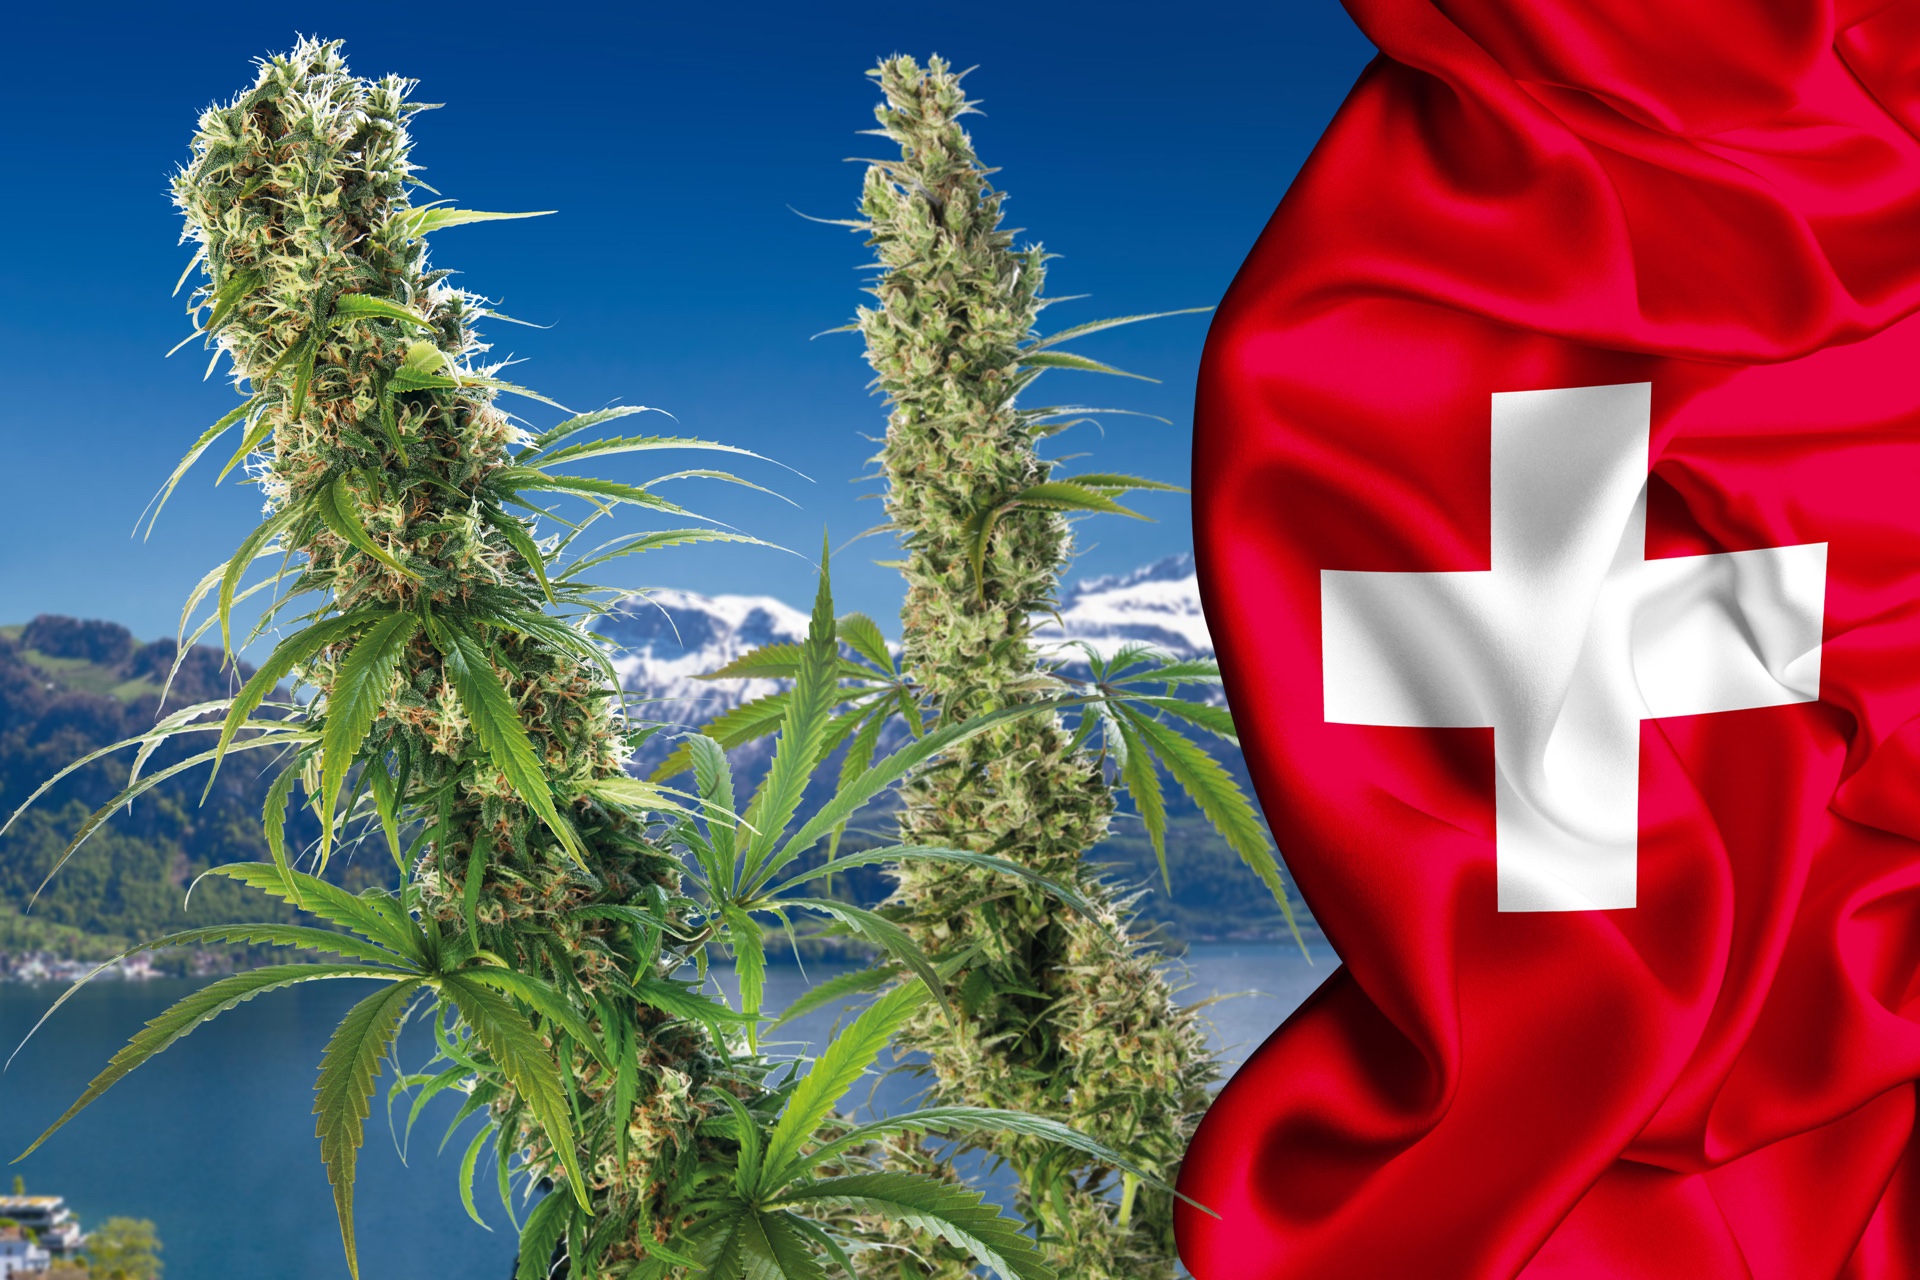 Switzerland Just Got One Step Closer to Federally Legalizing Weed